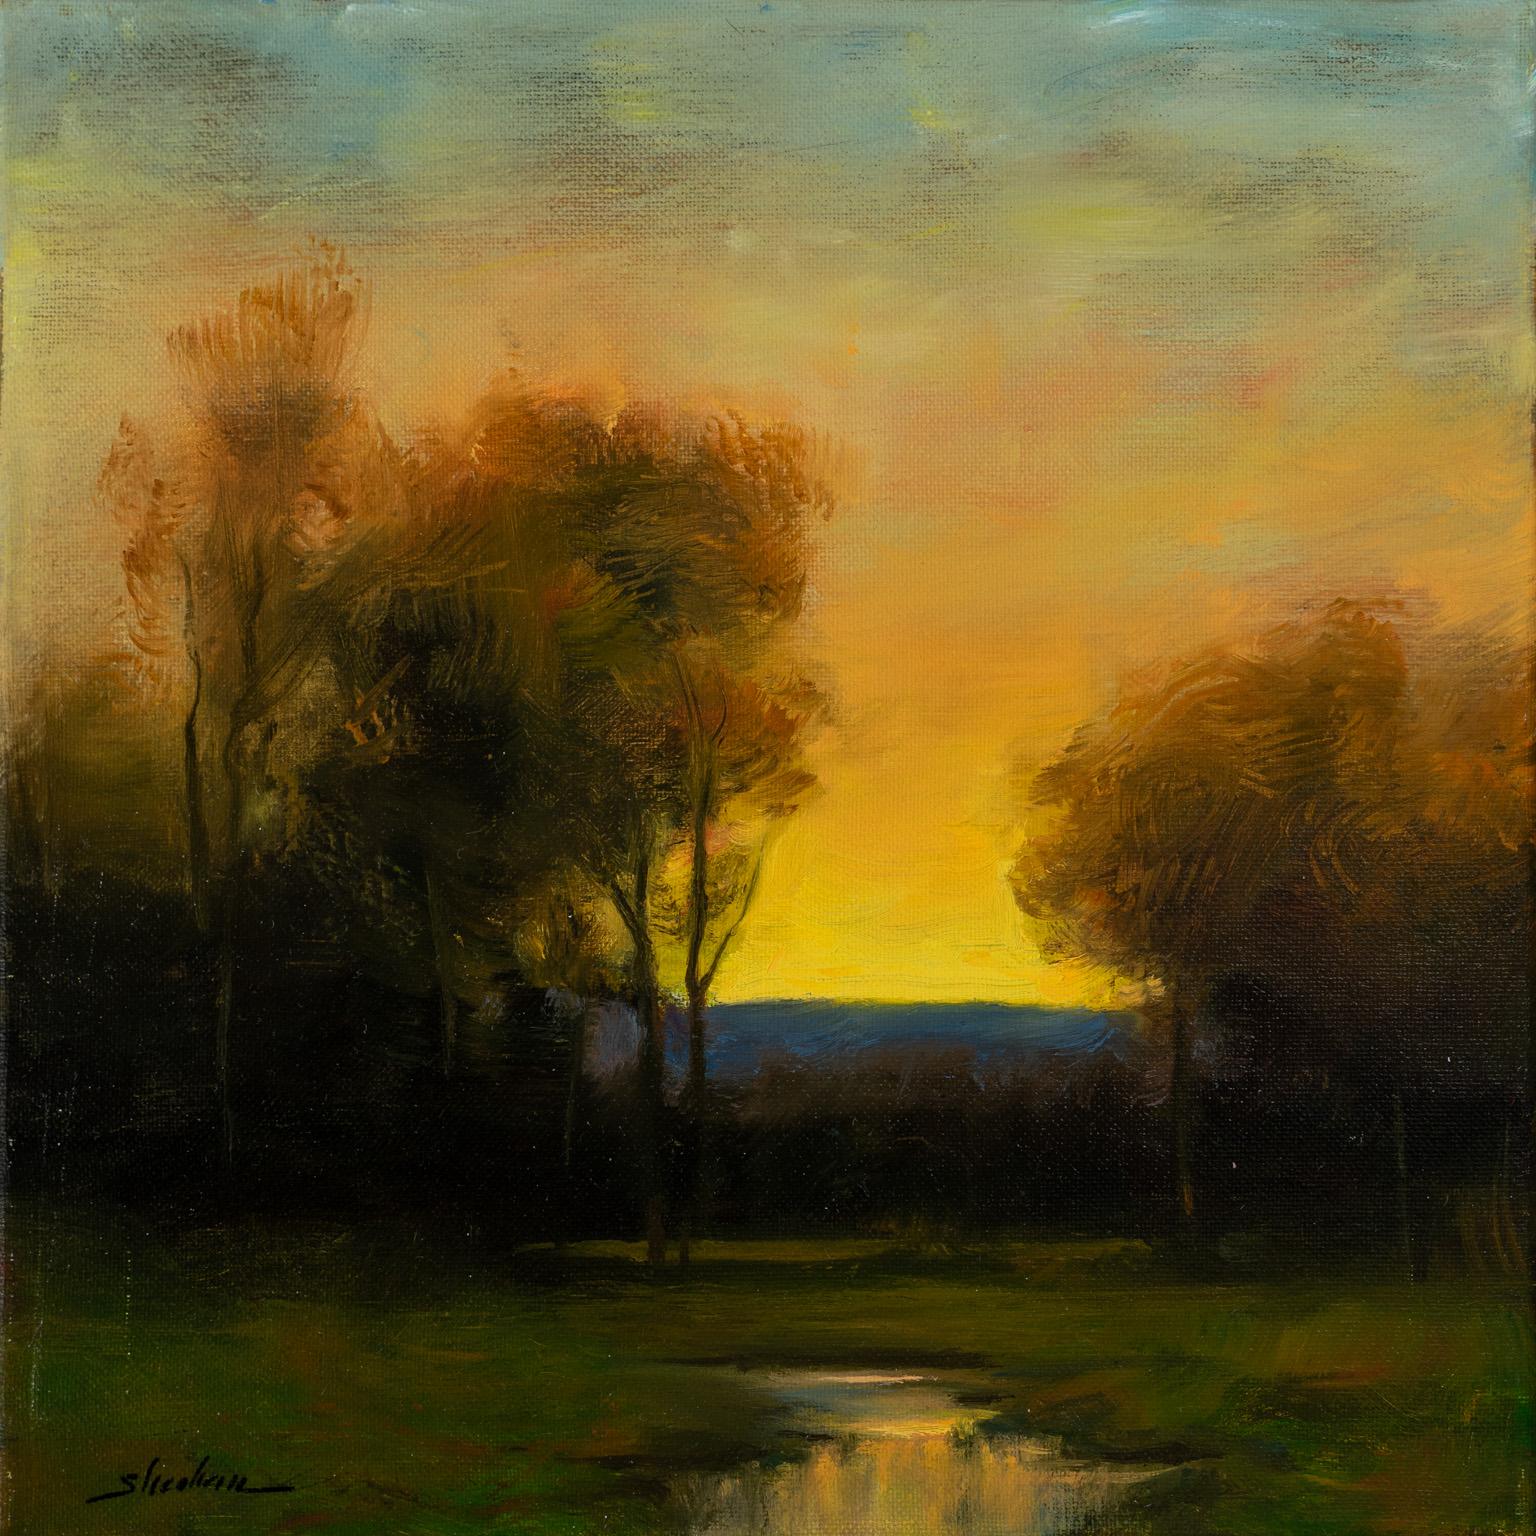 "Halcyon Glade" Realistic Oil Painting Landscape at Sunset